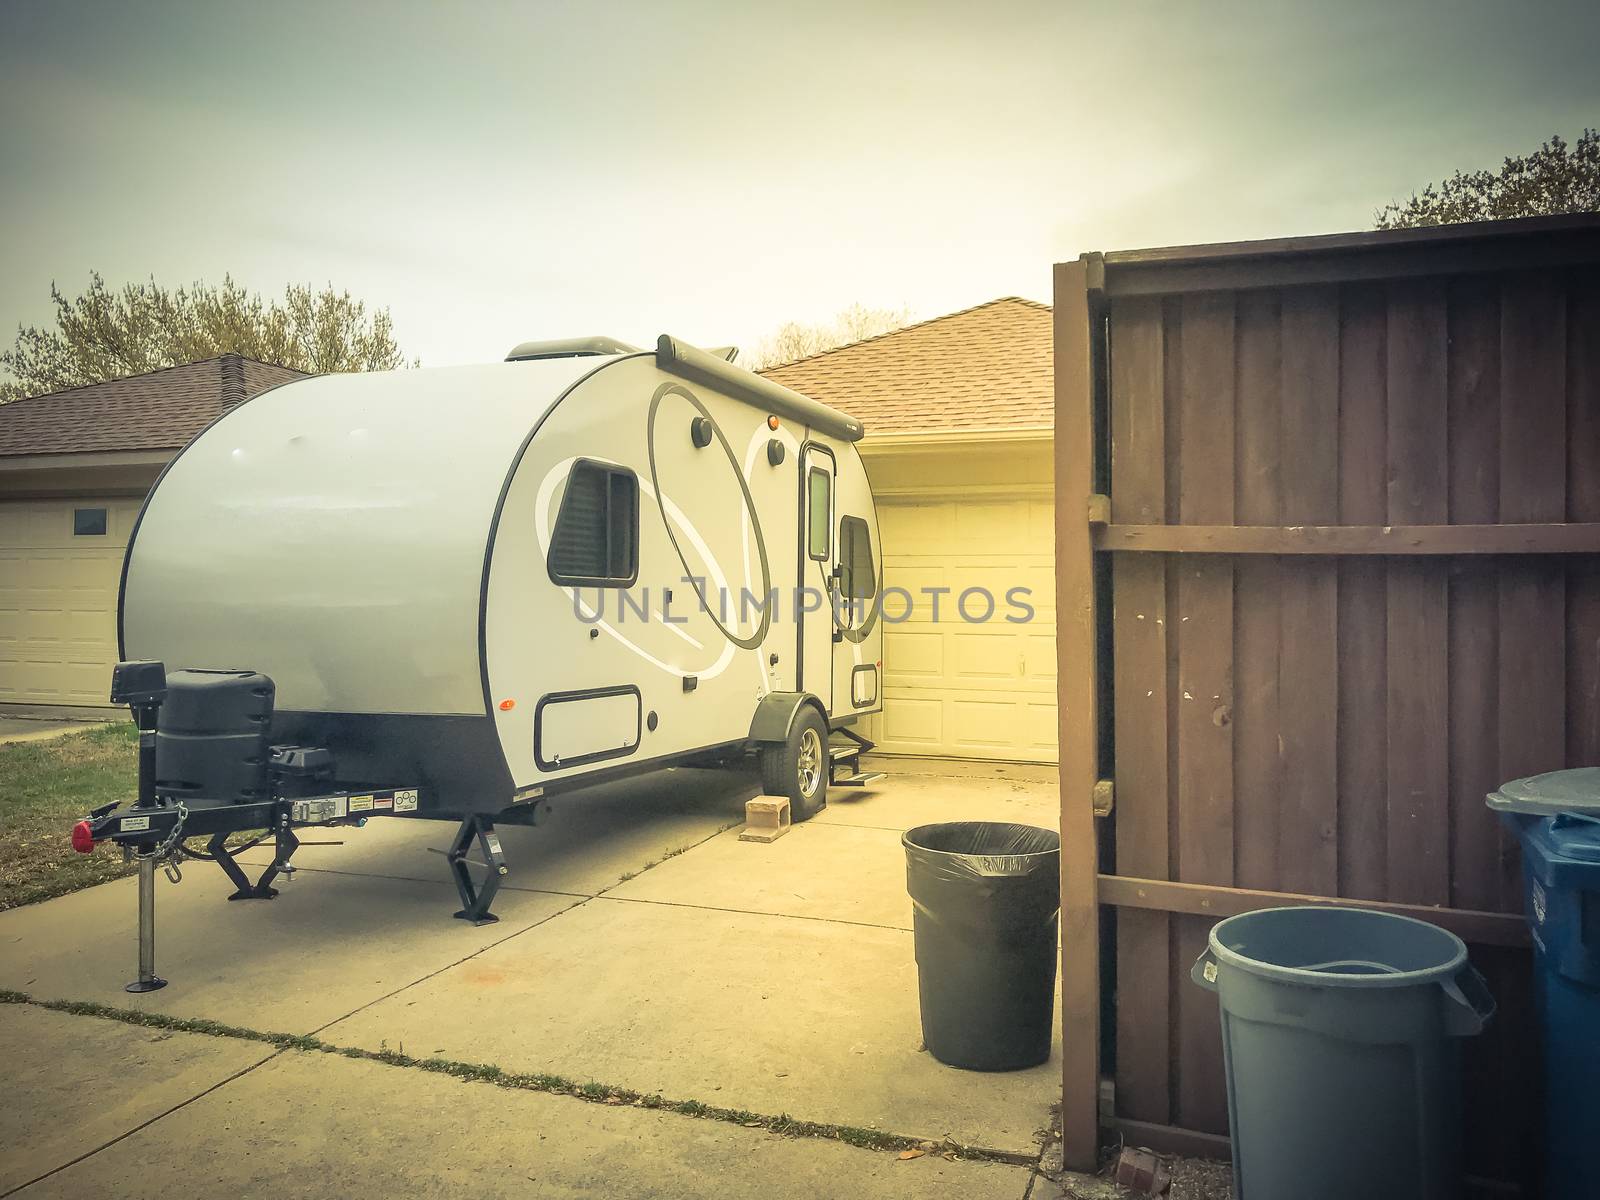 RV trailer parked at backyard of single family house, rear view by trongnguyen